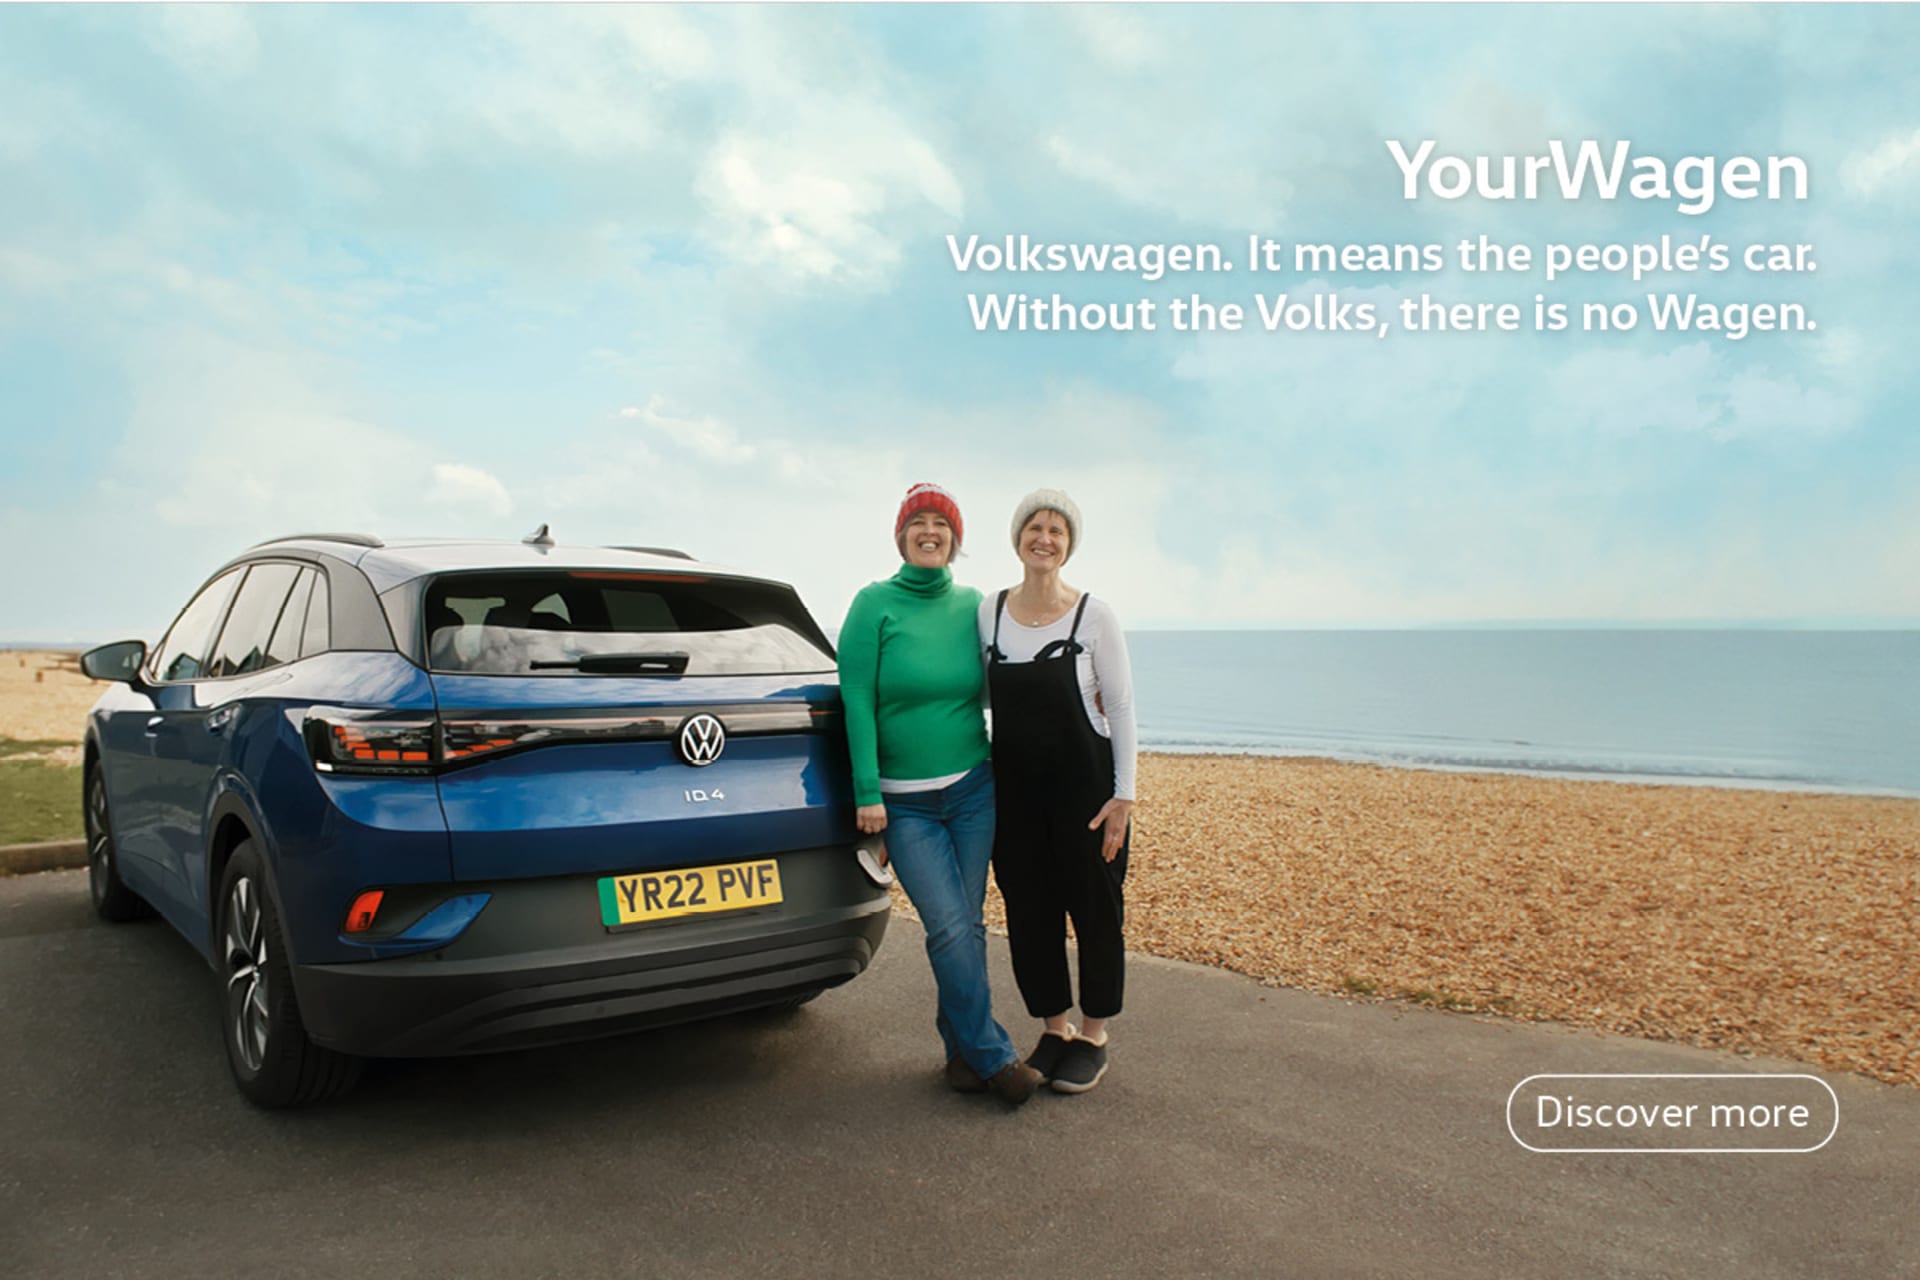 Volkswagen.  It means the people's car.